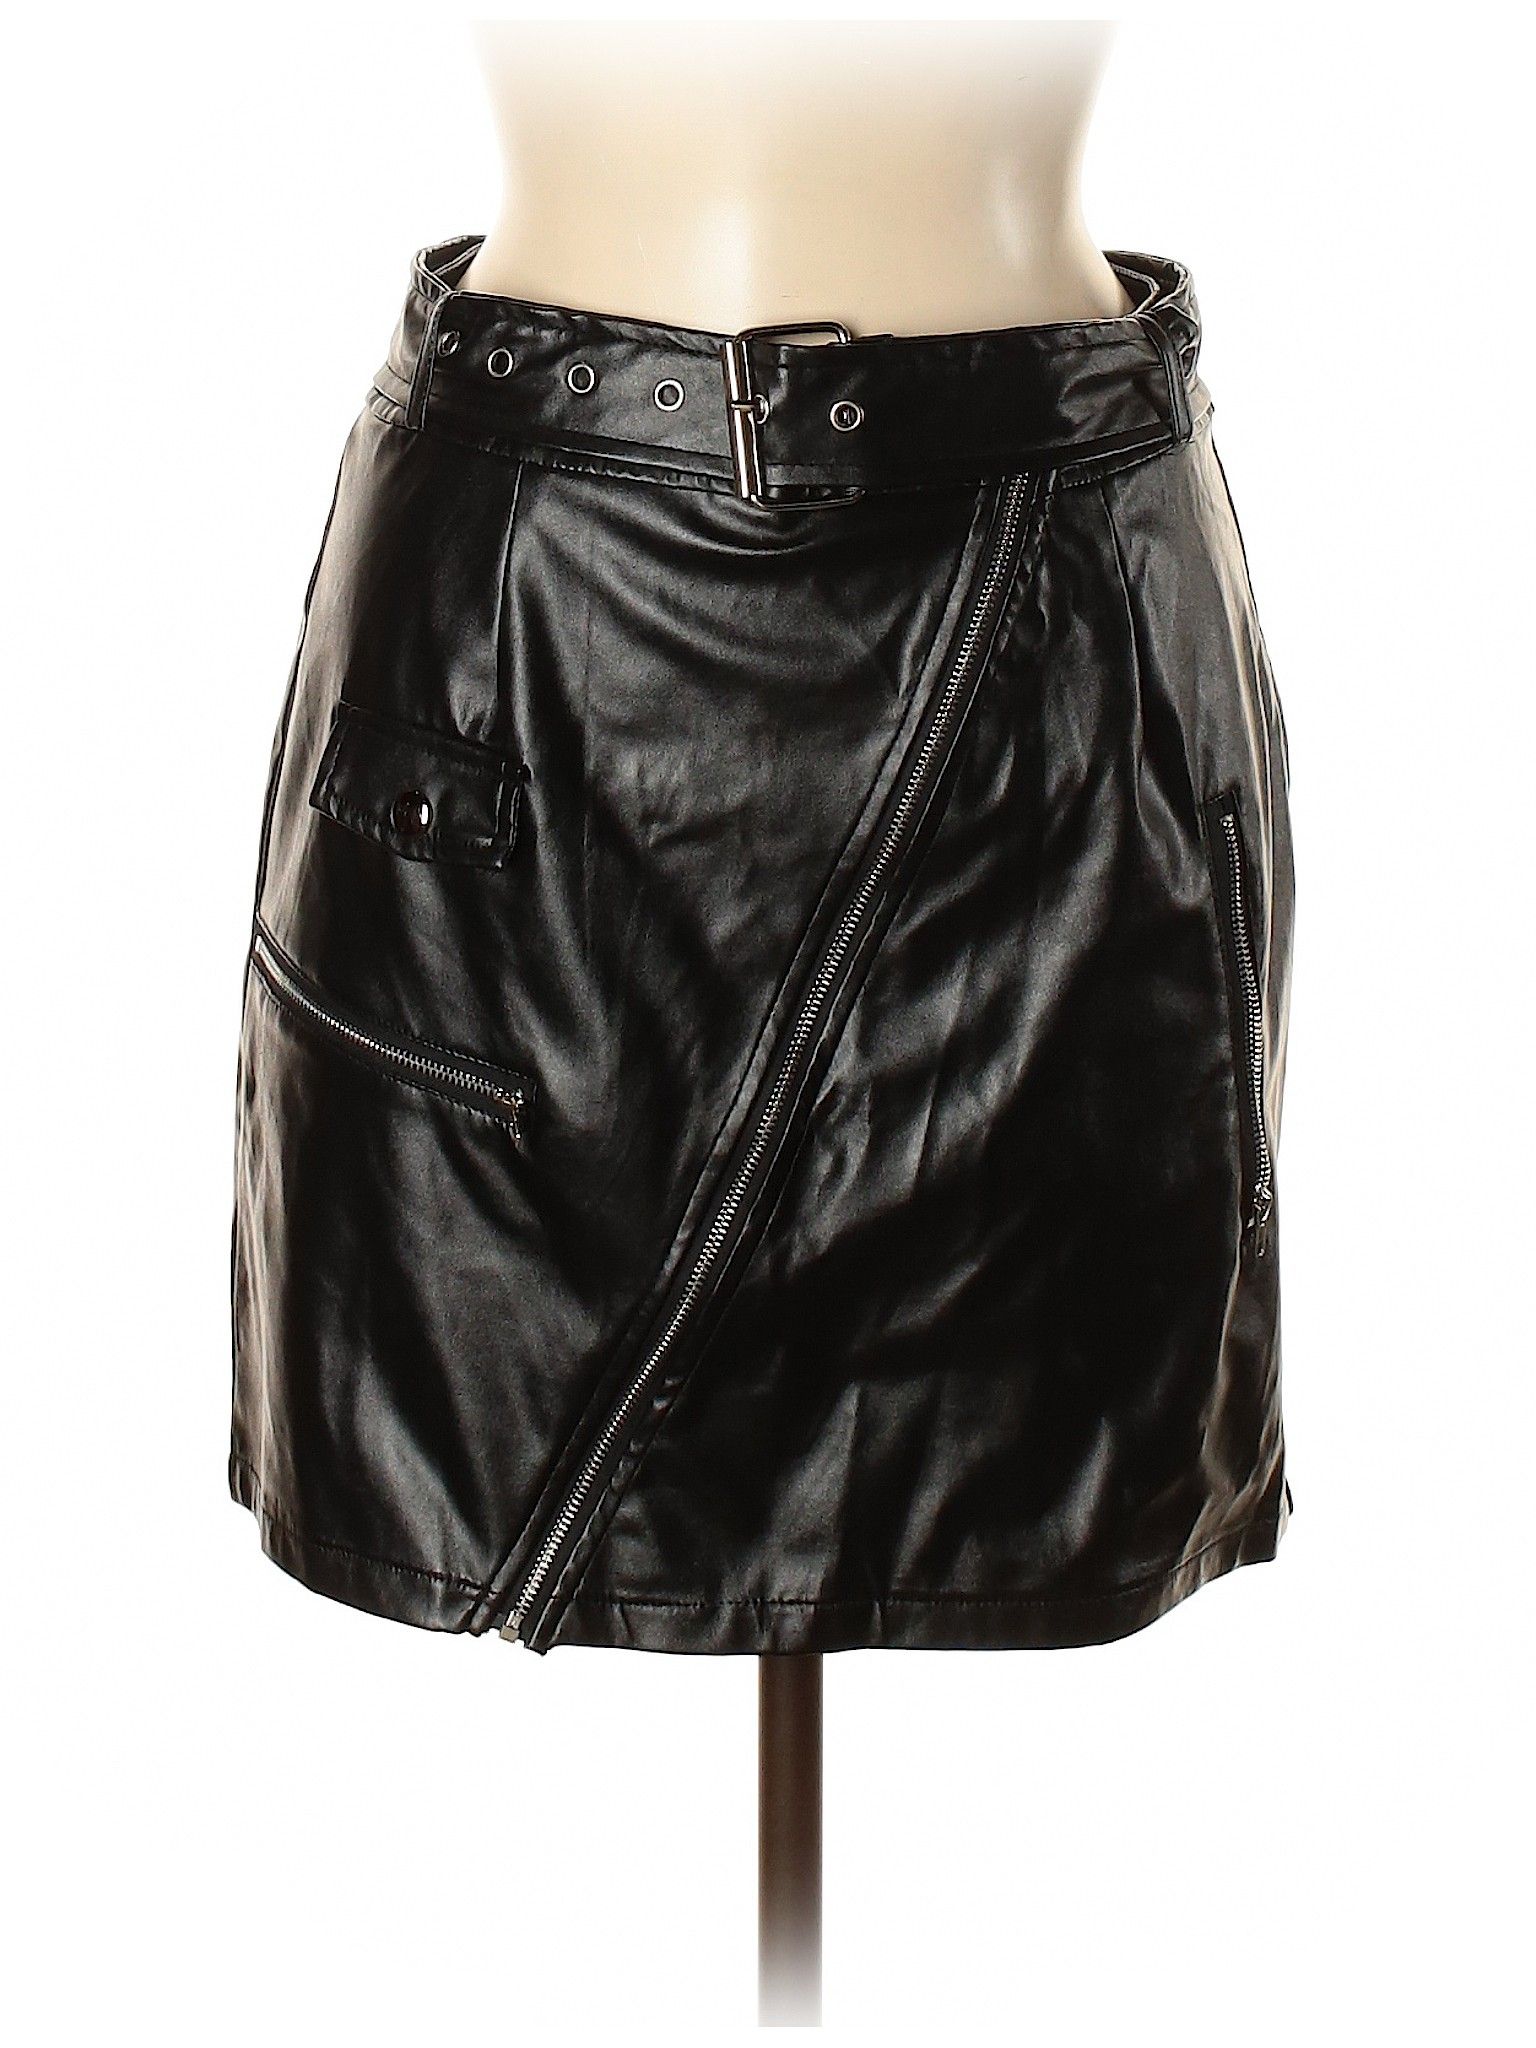 PrettyLittleThing Faux Leather Skirt Size 6: Black Women's Bottoms - 54541413 | thredUP